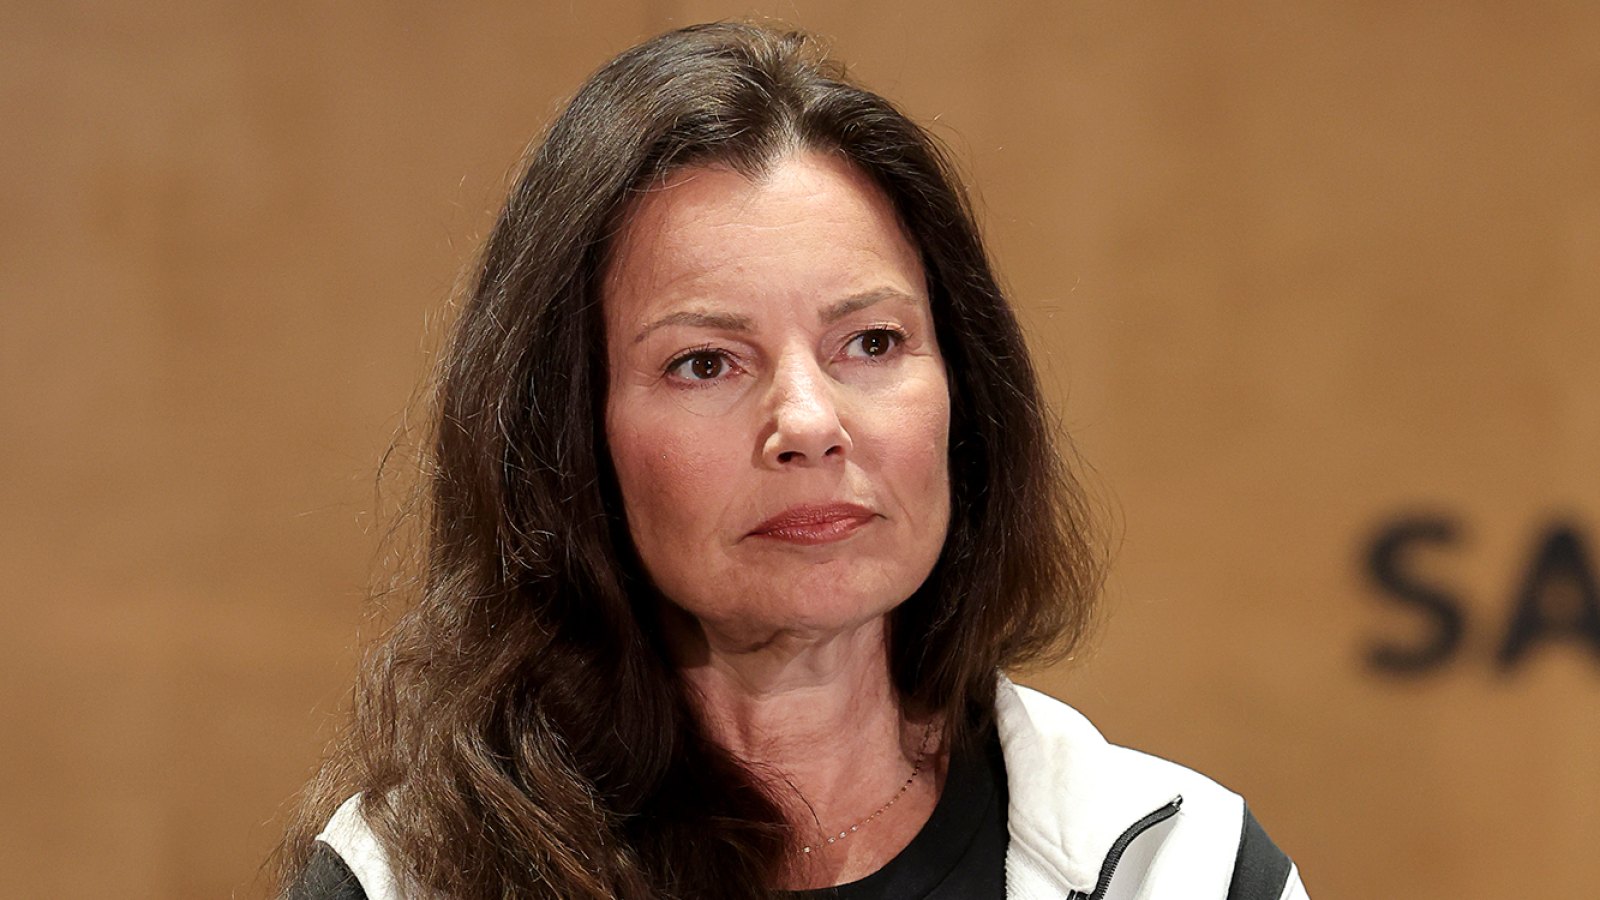 Fran Drescher Says AMPTP 'Is Punishing Us' for Strike, Has 'Stonewalled' Negotiations